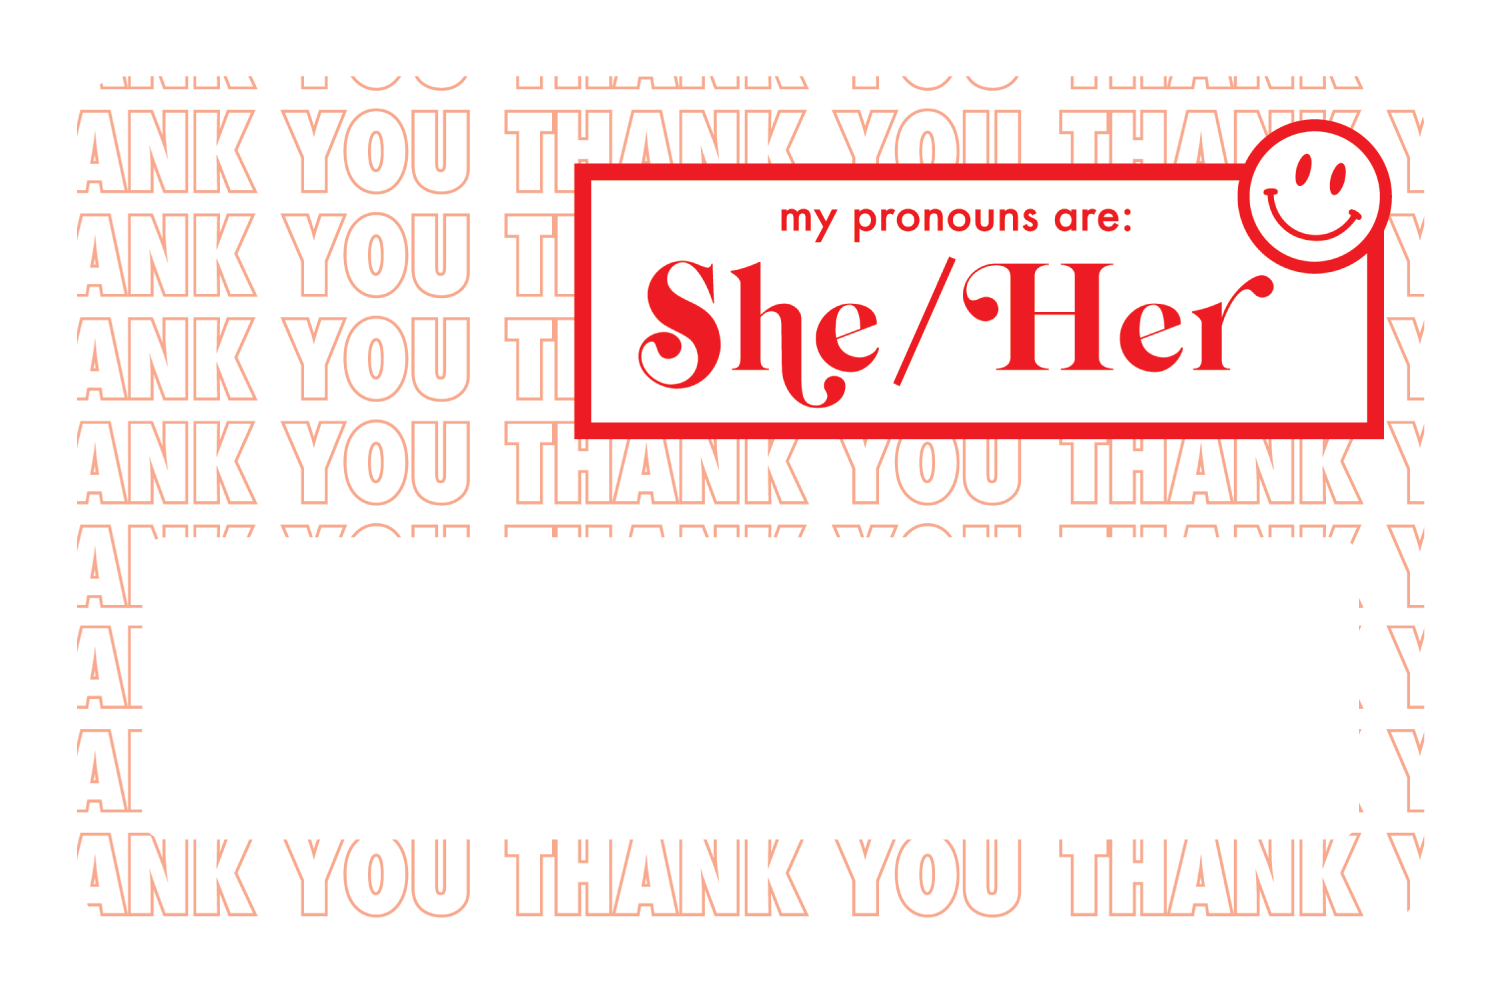 She/Her